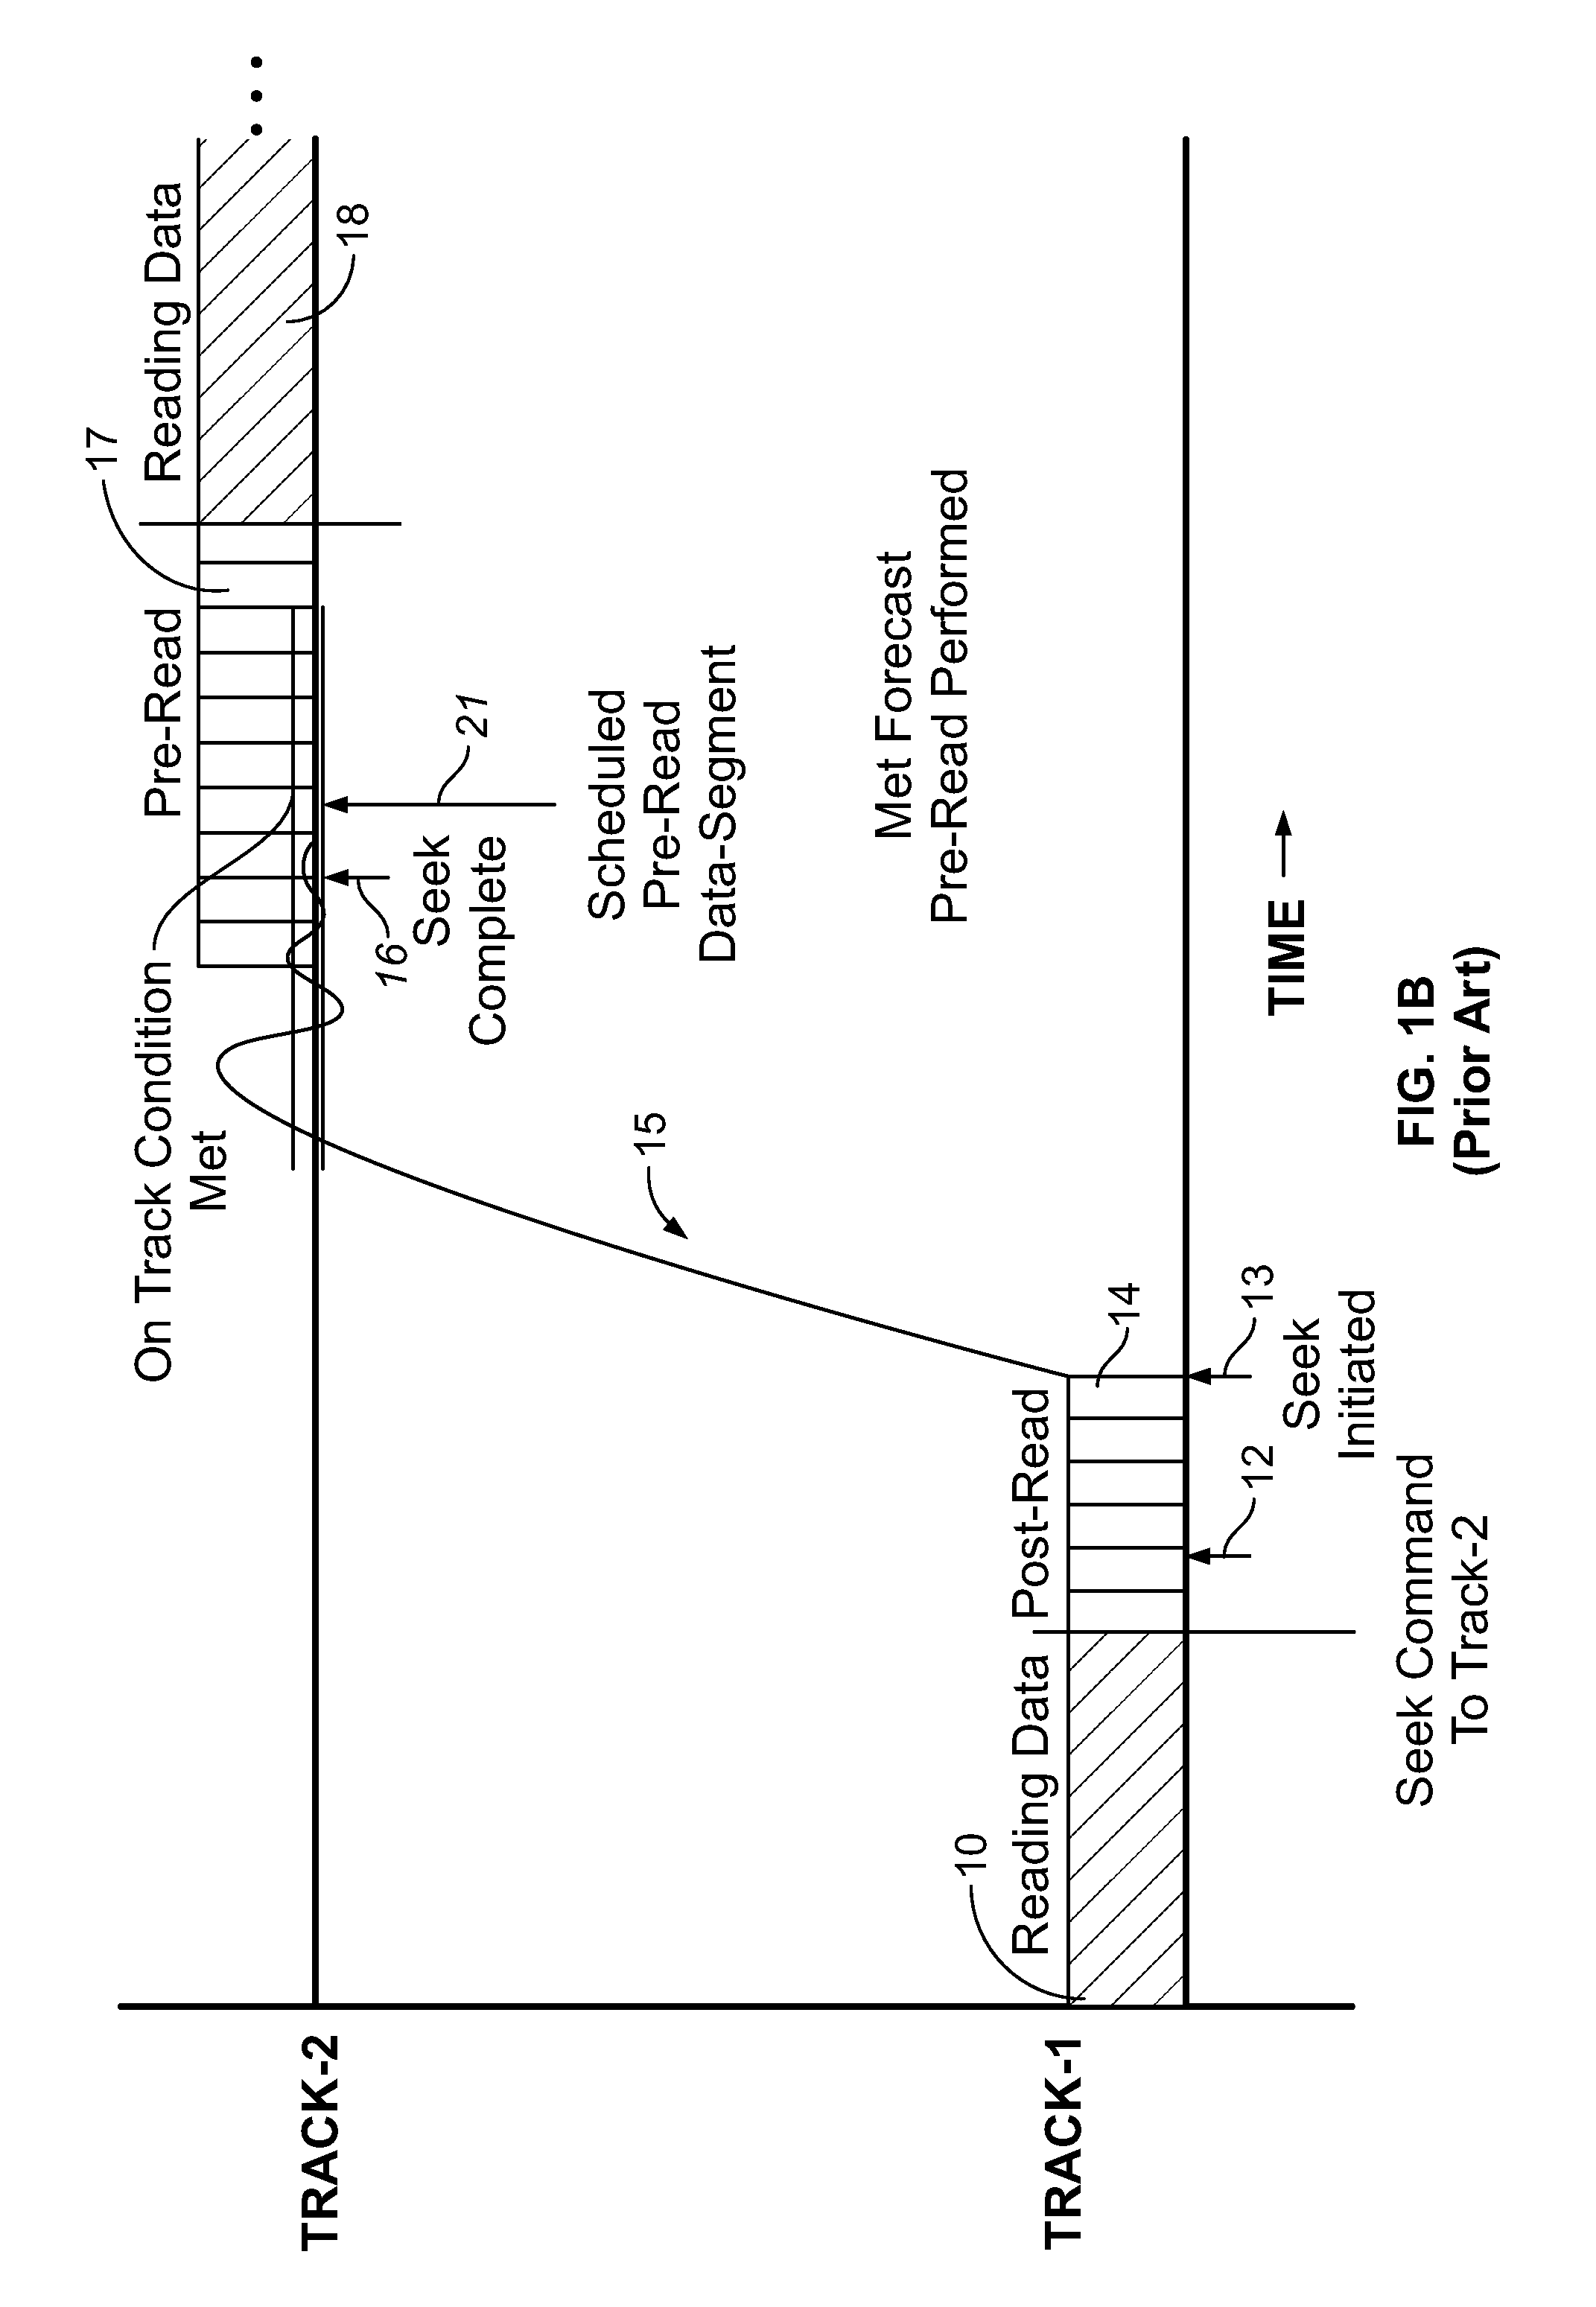 Adaptively modifying pre-read operations within a rotating media storage device